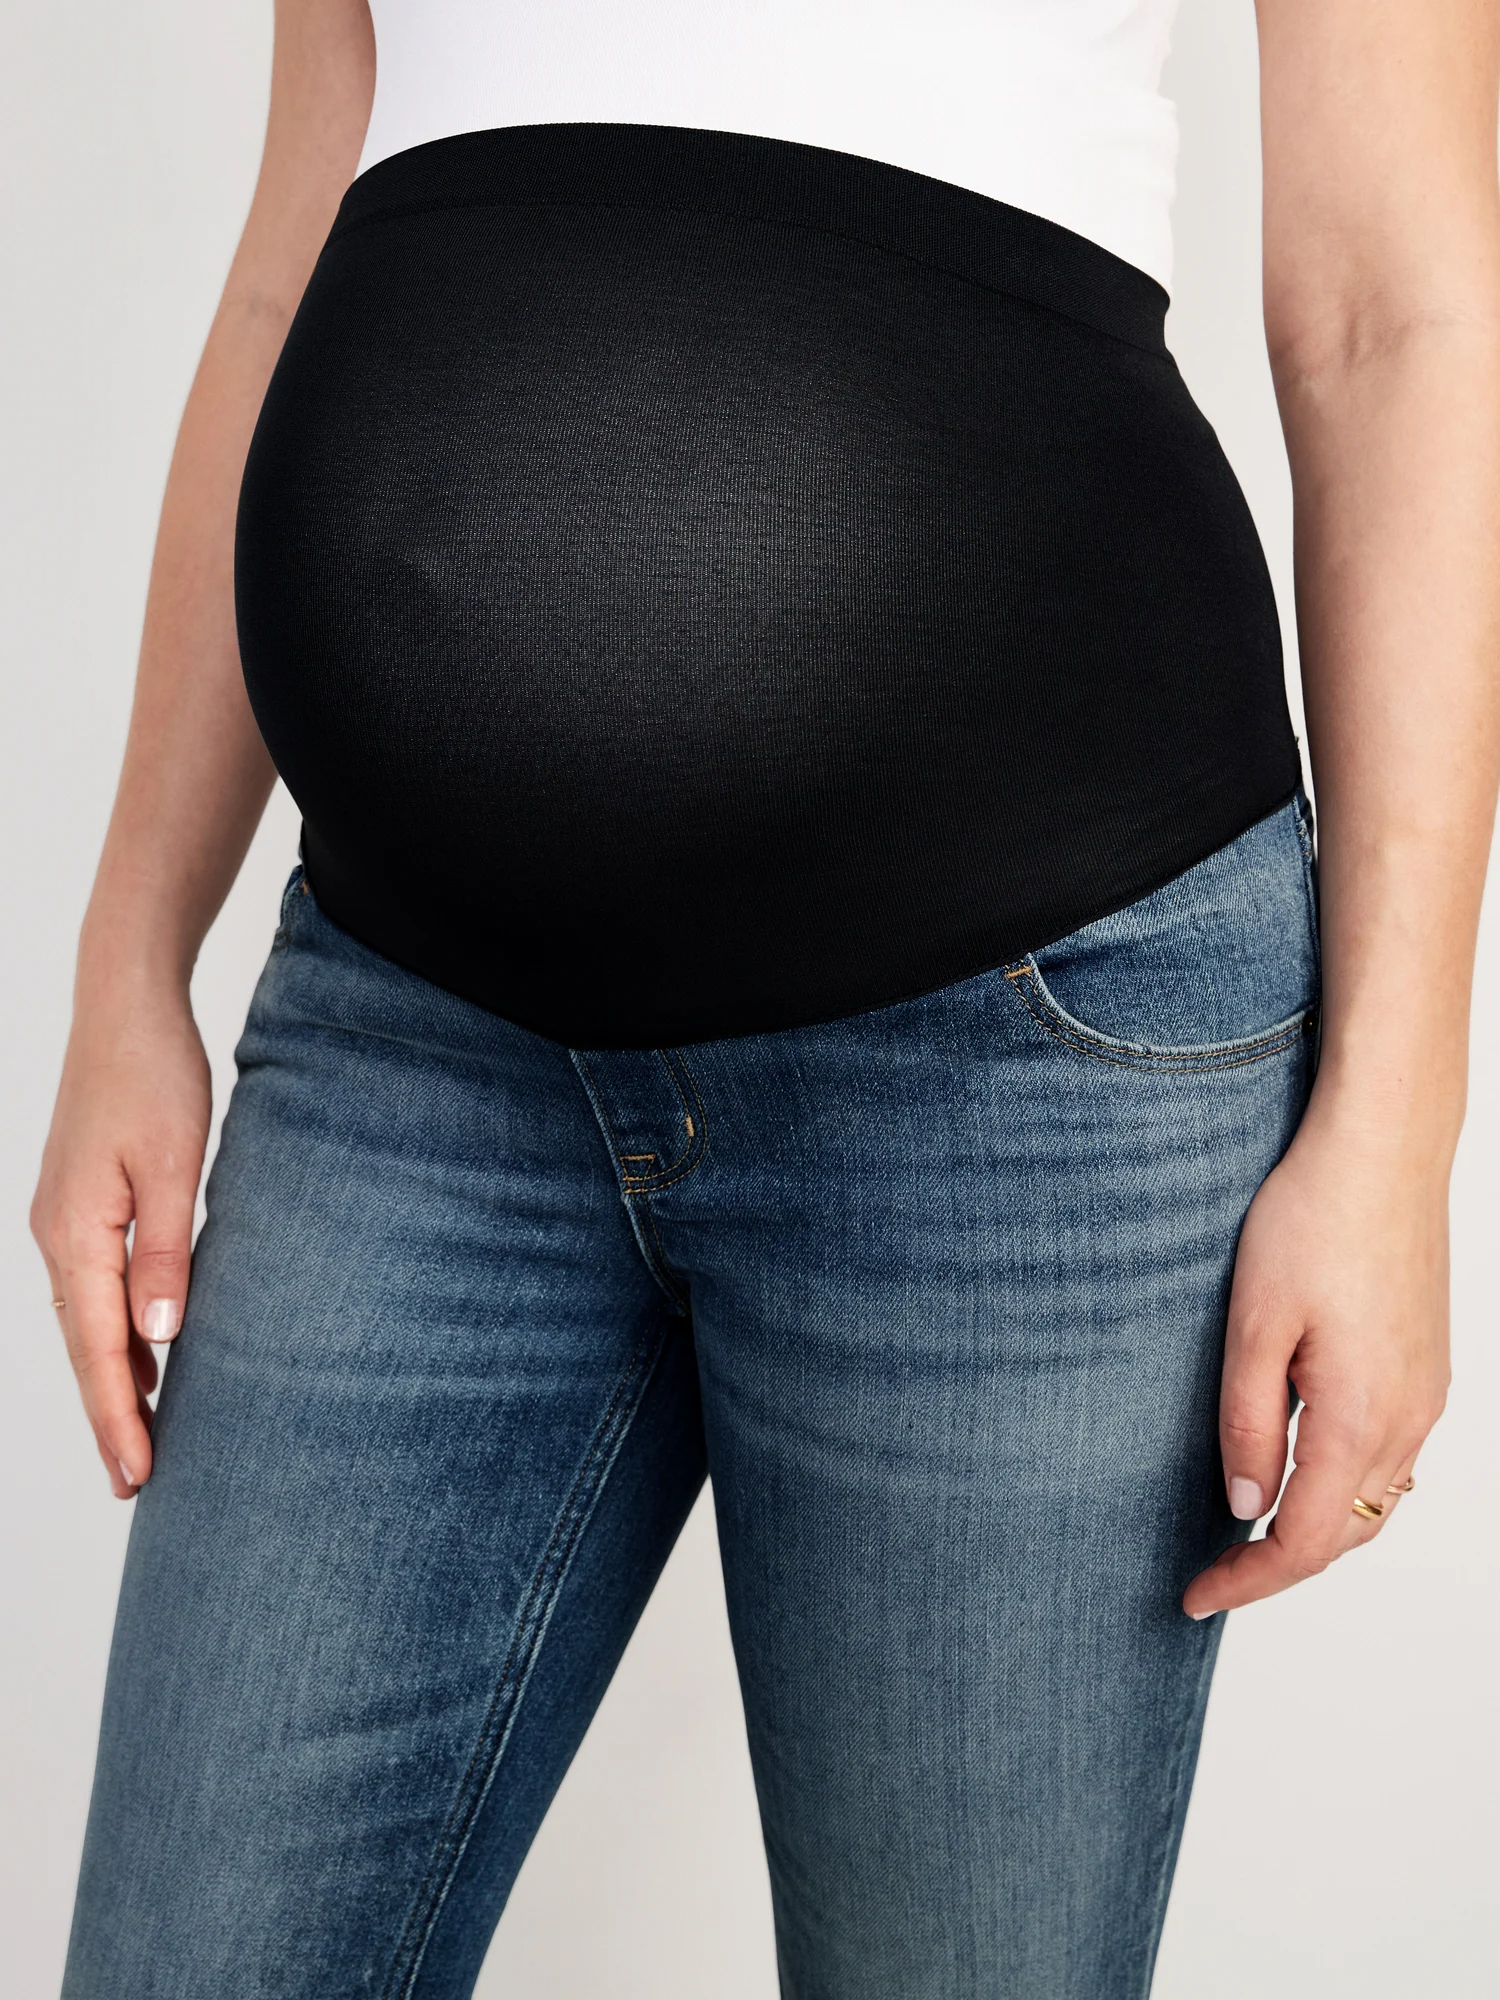 Old navy maternity jeans